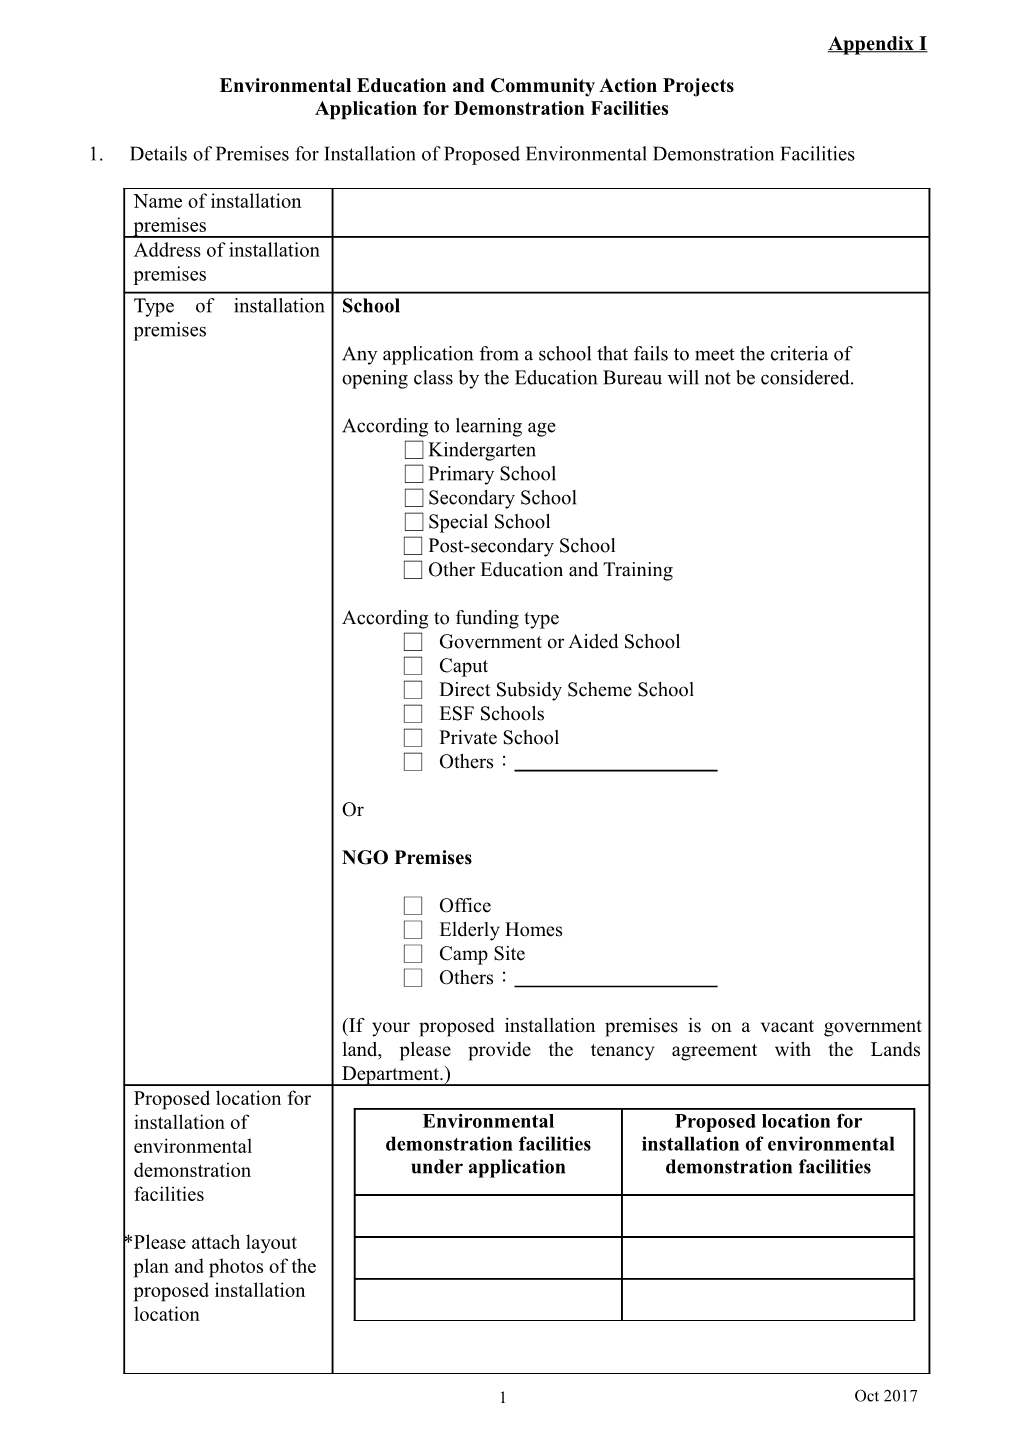 Application for Demonstration Facilities